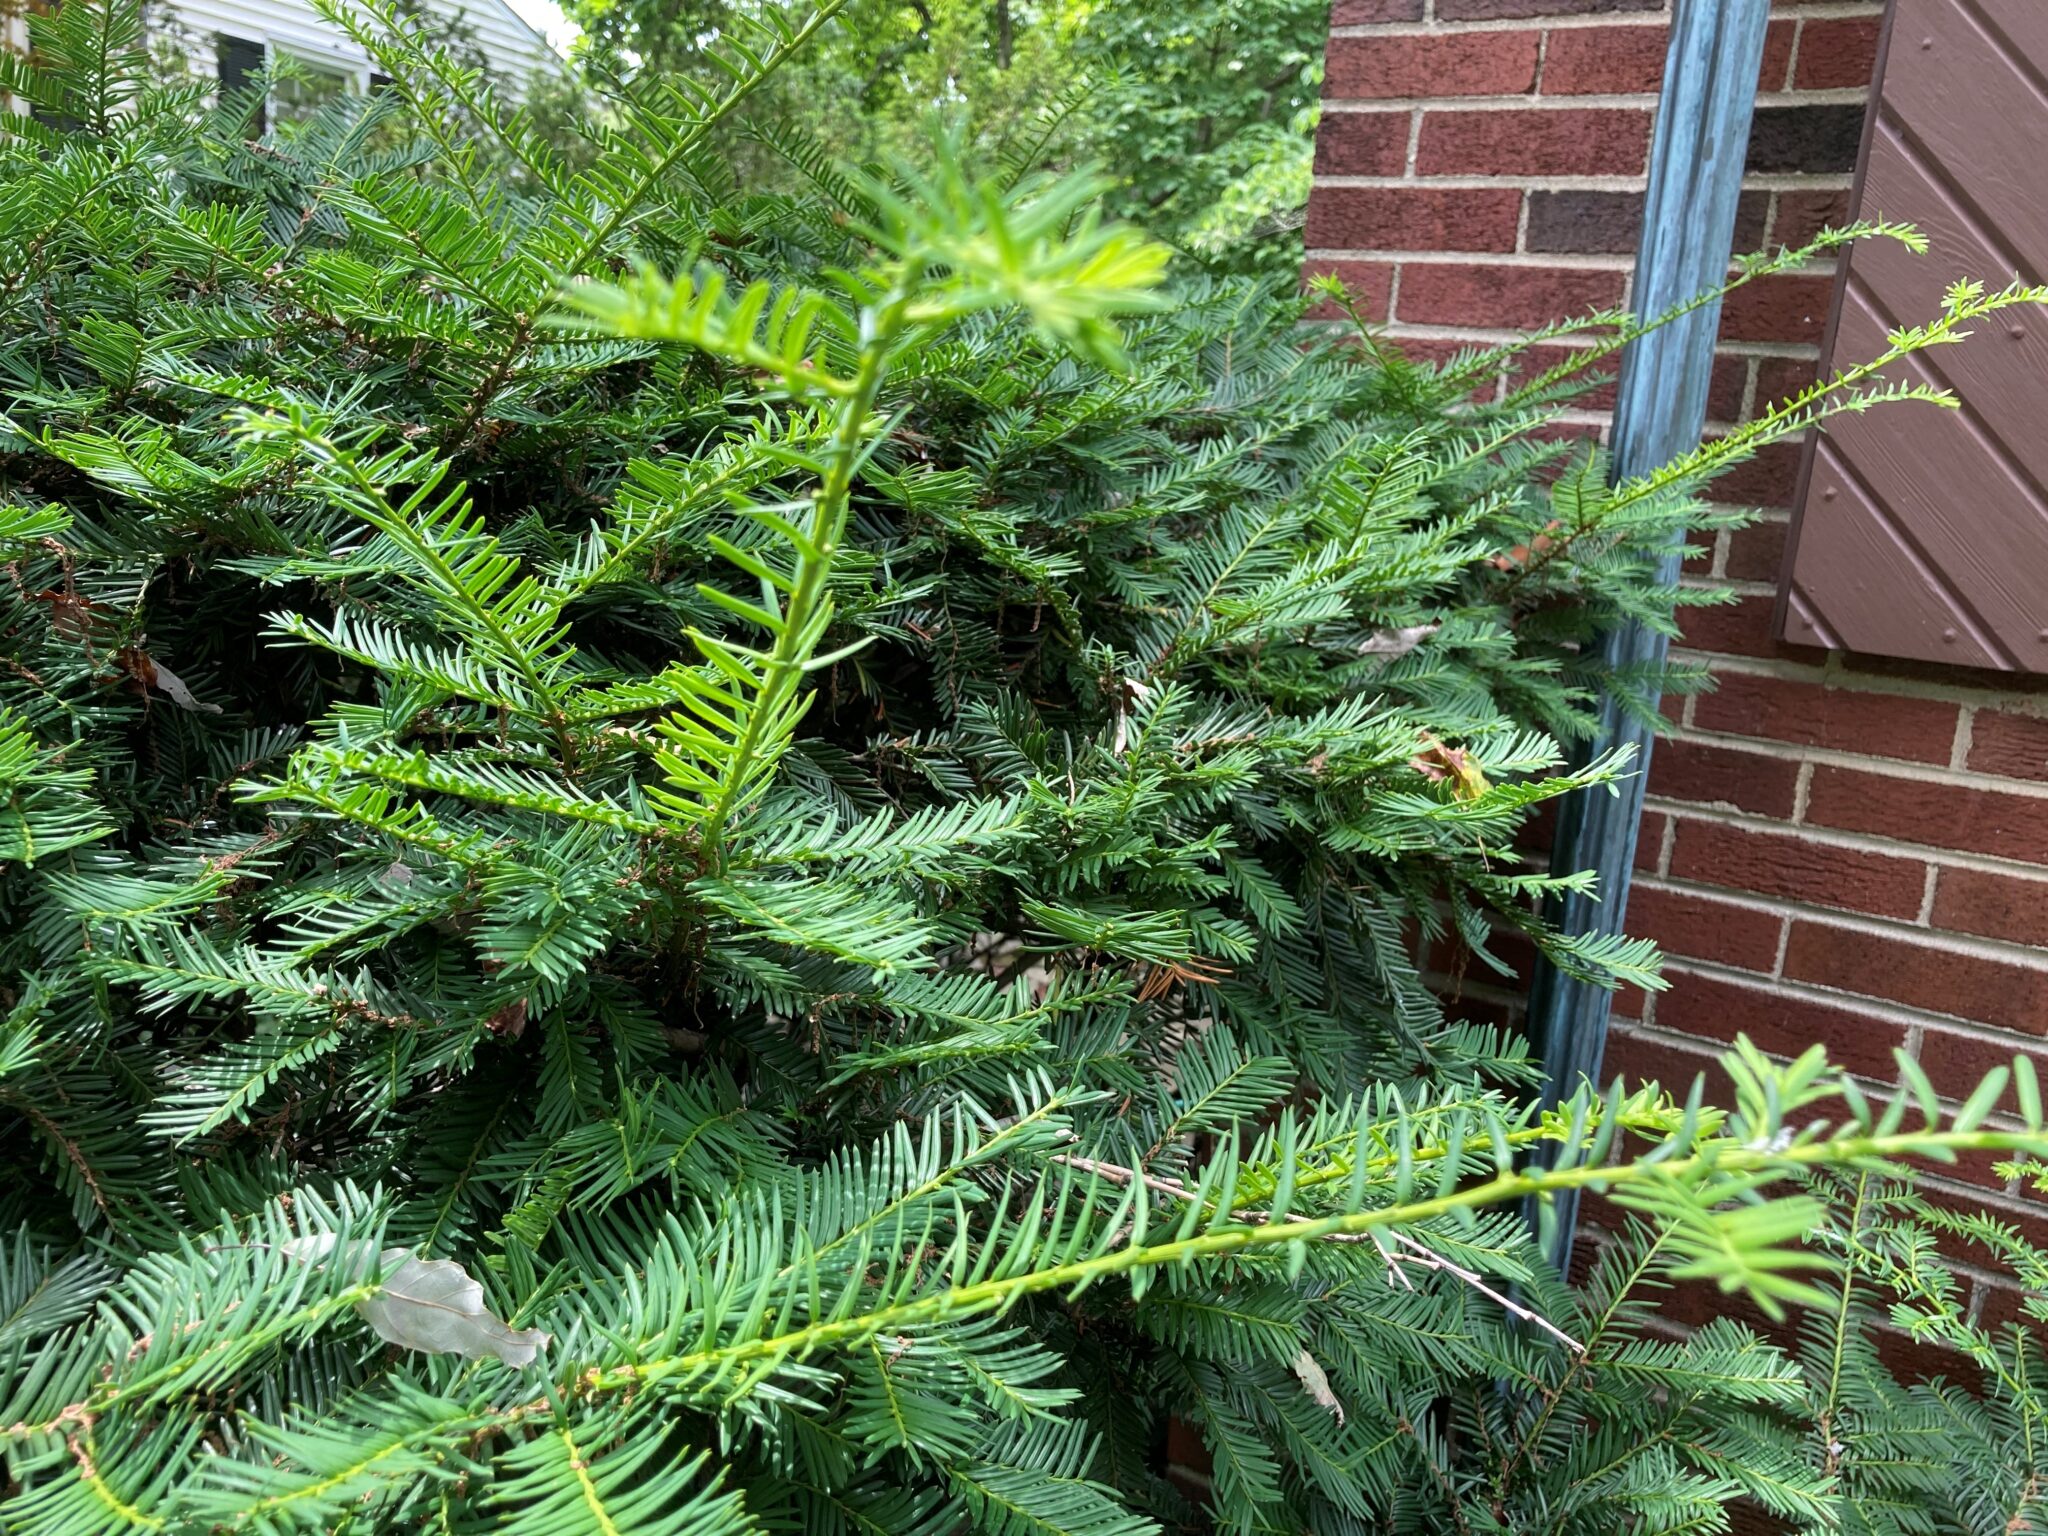 A yew bush used as landscaping is in need of a trim. Don’t feed the trimmings to livestock or death will occur. (Photo Credit: Keith Johnson)